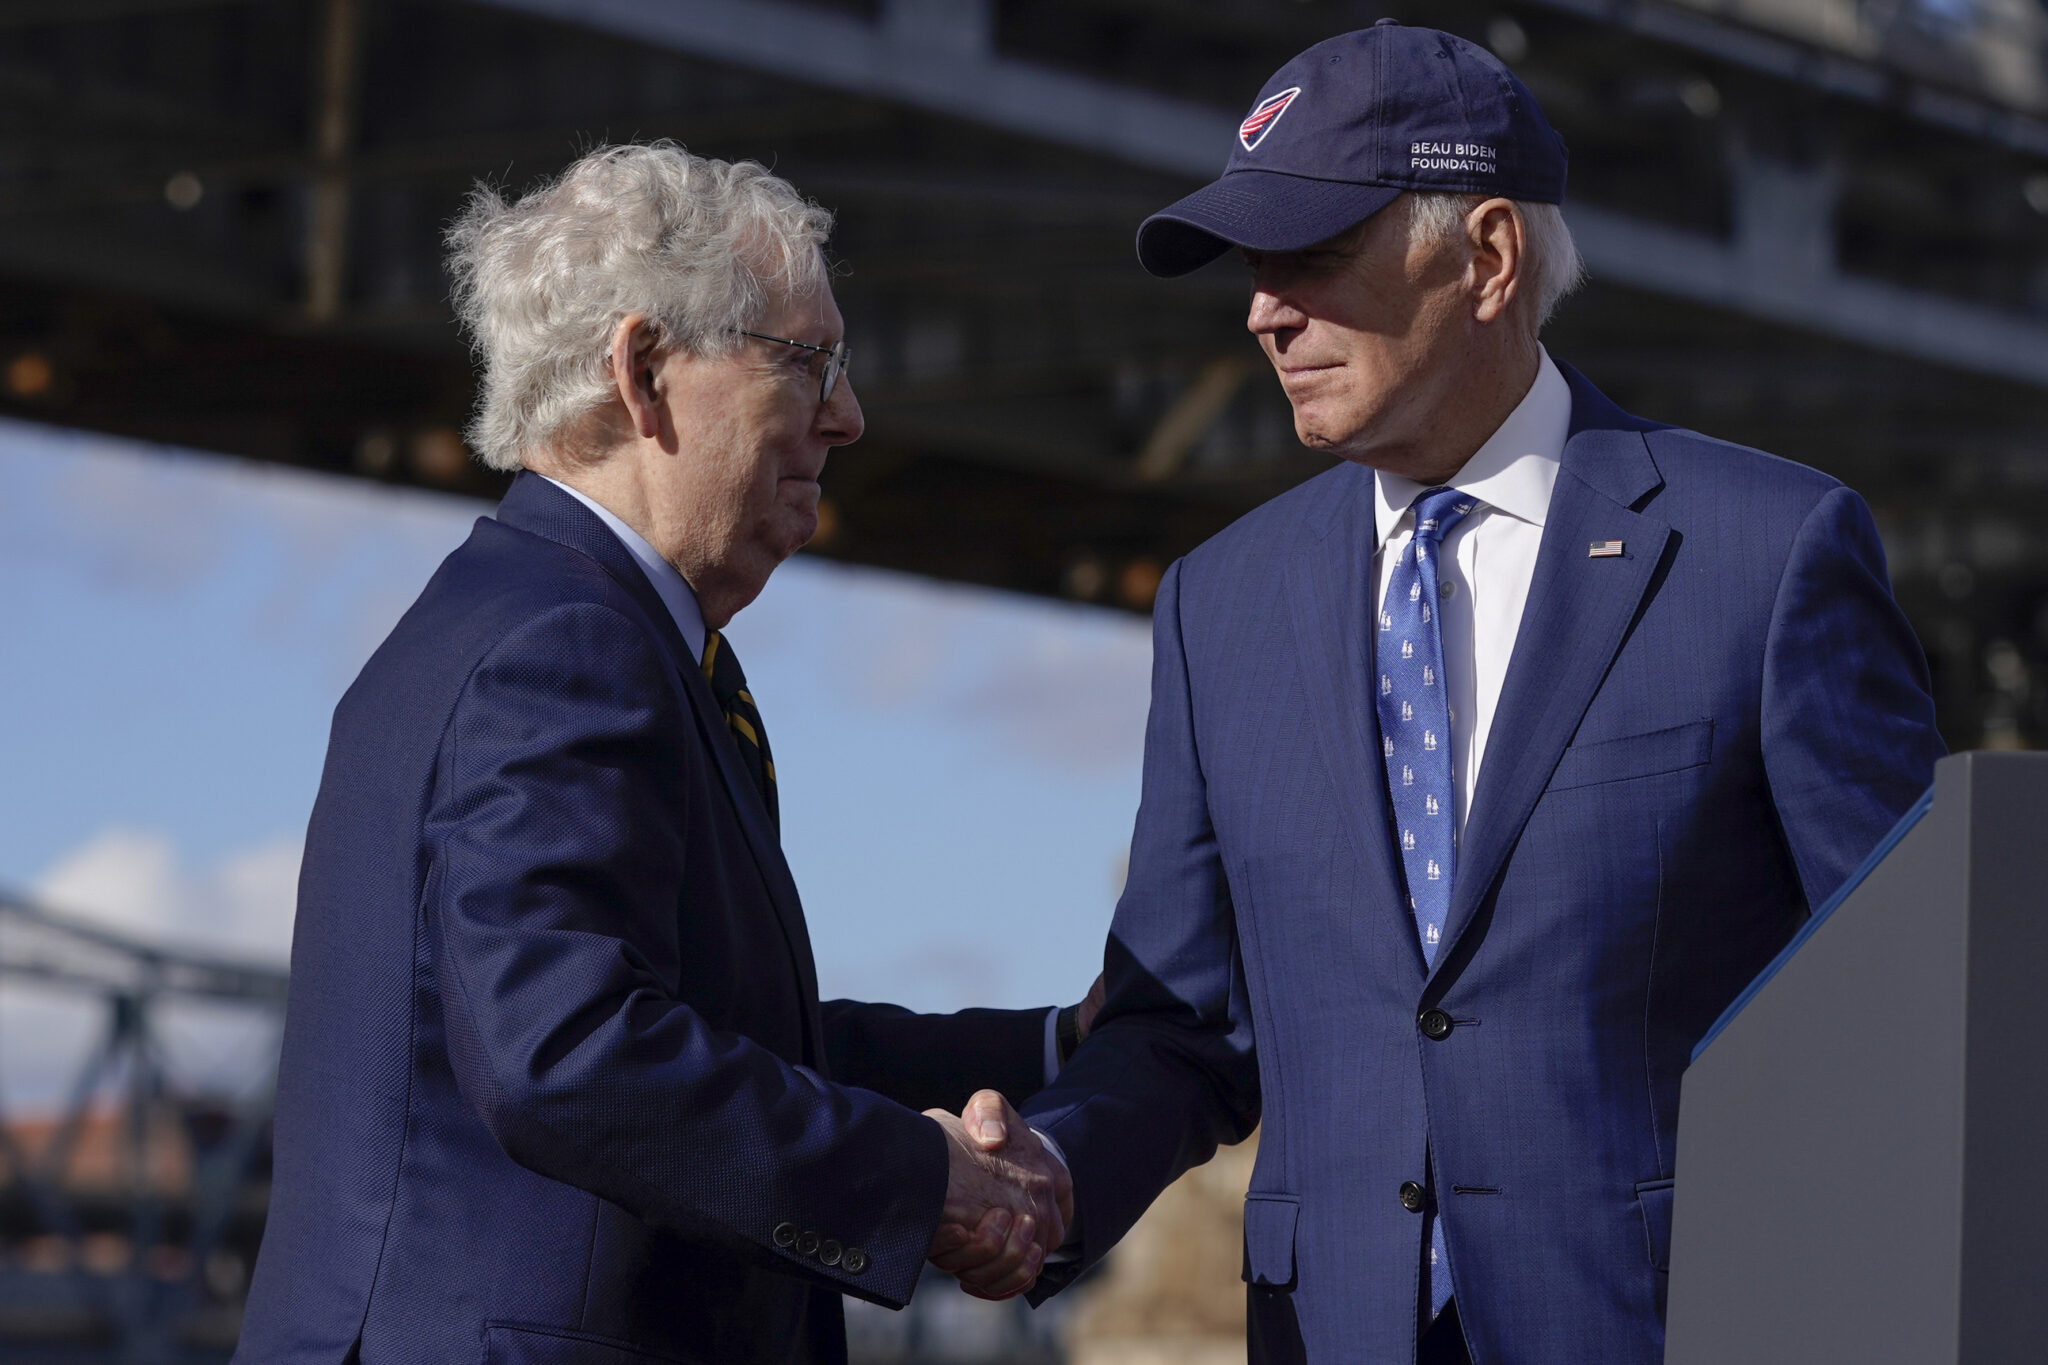 President Joe Biden shakes hands with Senate Minority Leader Mitch McConnell of Ky., after speaking about his infrastructure agenda under the Clay Wade Bailey Bridge, Wednesday, Jan. 4, 2023, in Covington, Ky. Biden's infrastructure deal that was enacted in late 2021 will offer federal grants to Ohio and Kentucky to build a companion bridge that is intended to alleviate traffic on the Brent Spence Bridge, background at left. (AP Photo/Patrick Semansky)